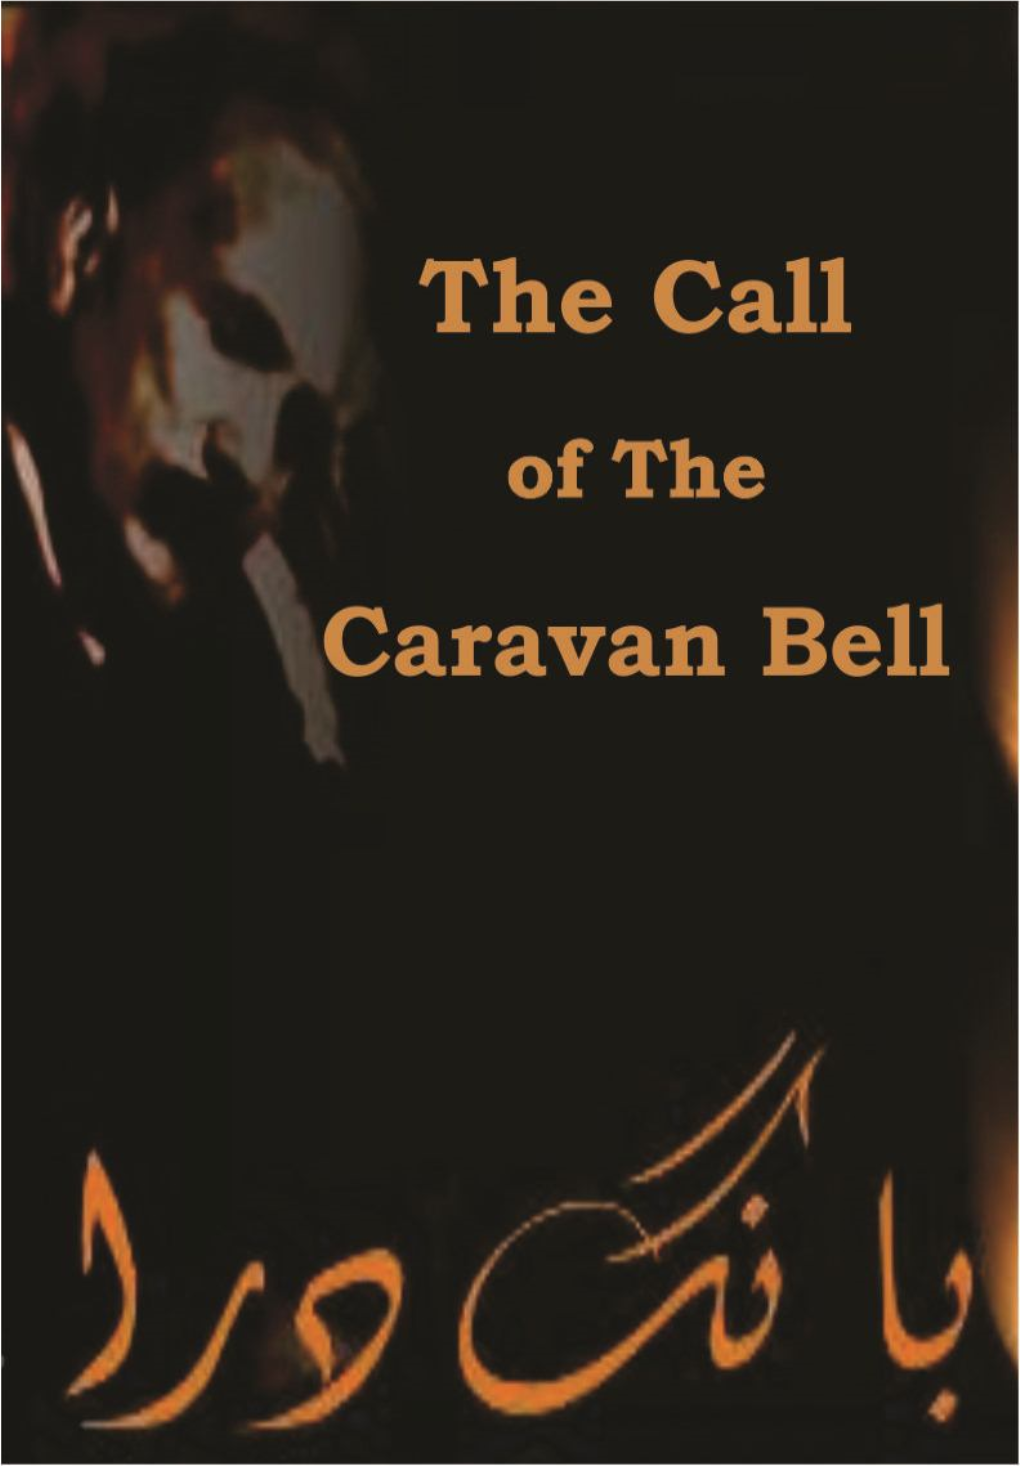 The Call of the Caravan Bell